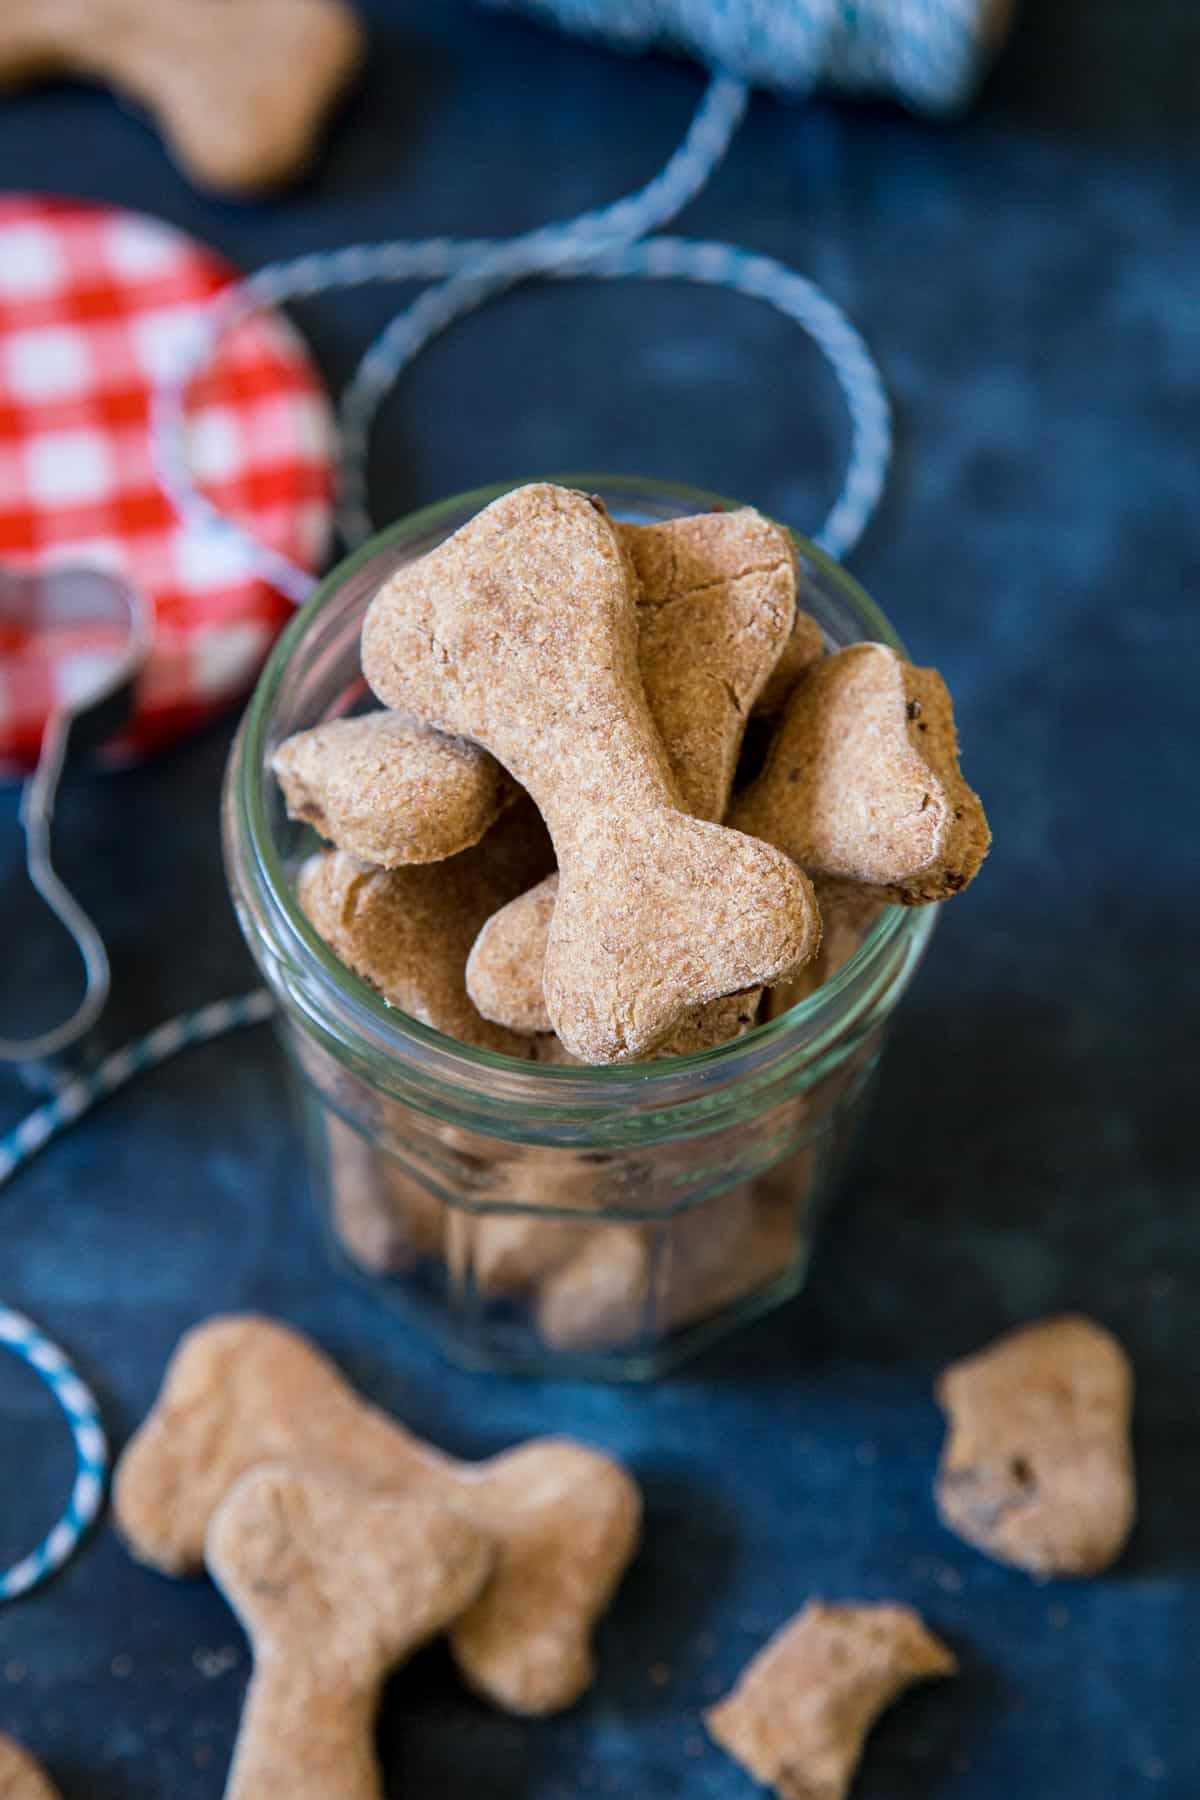 Bacon dog treats in a jar on a blue background.